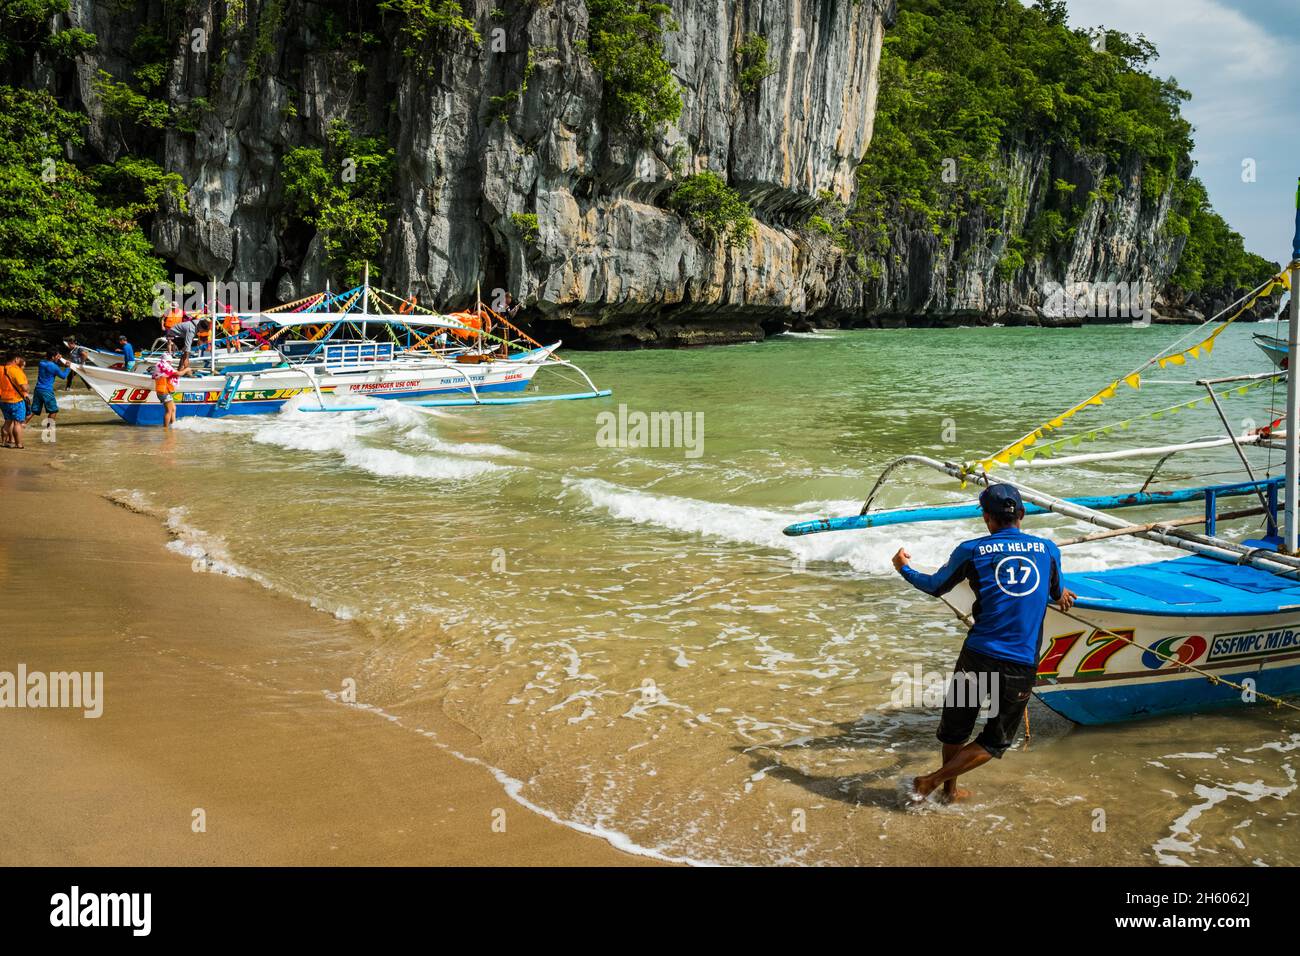 July 2017. Ecotourism at the Subterranean River, a coastal cave with kilometers of navigable water and that is recognized as one of the seven natural wonders of the world, provides an economic alternative to traditional forest livelihoods. Sabong Beach, Puerto Princesa, Palawan, Philippines. Stock Photo